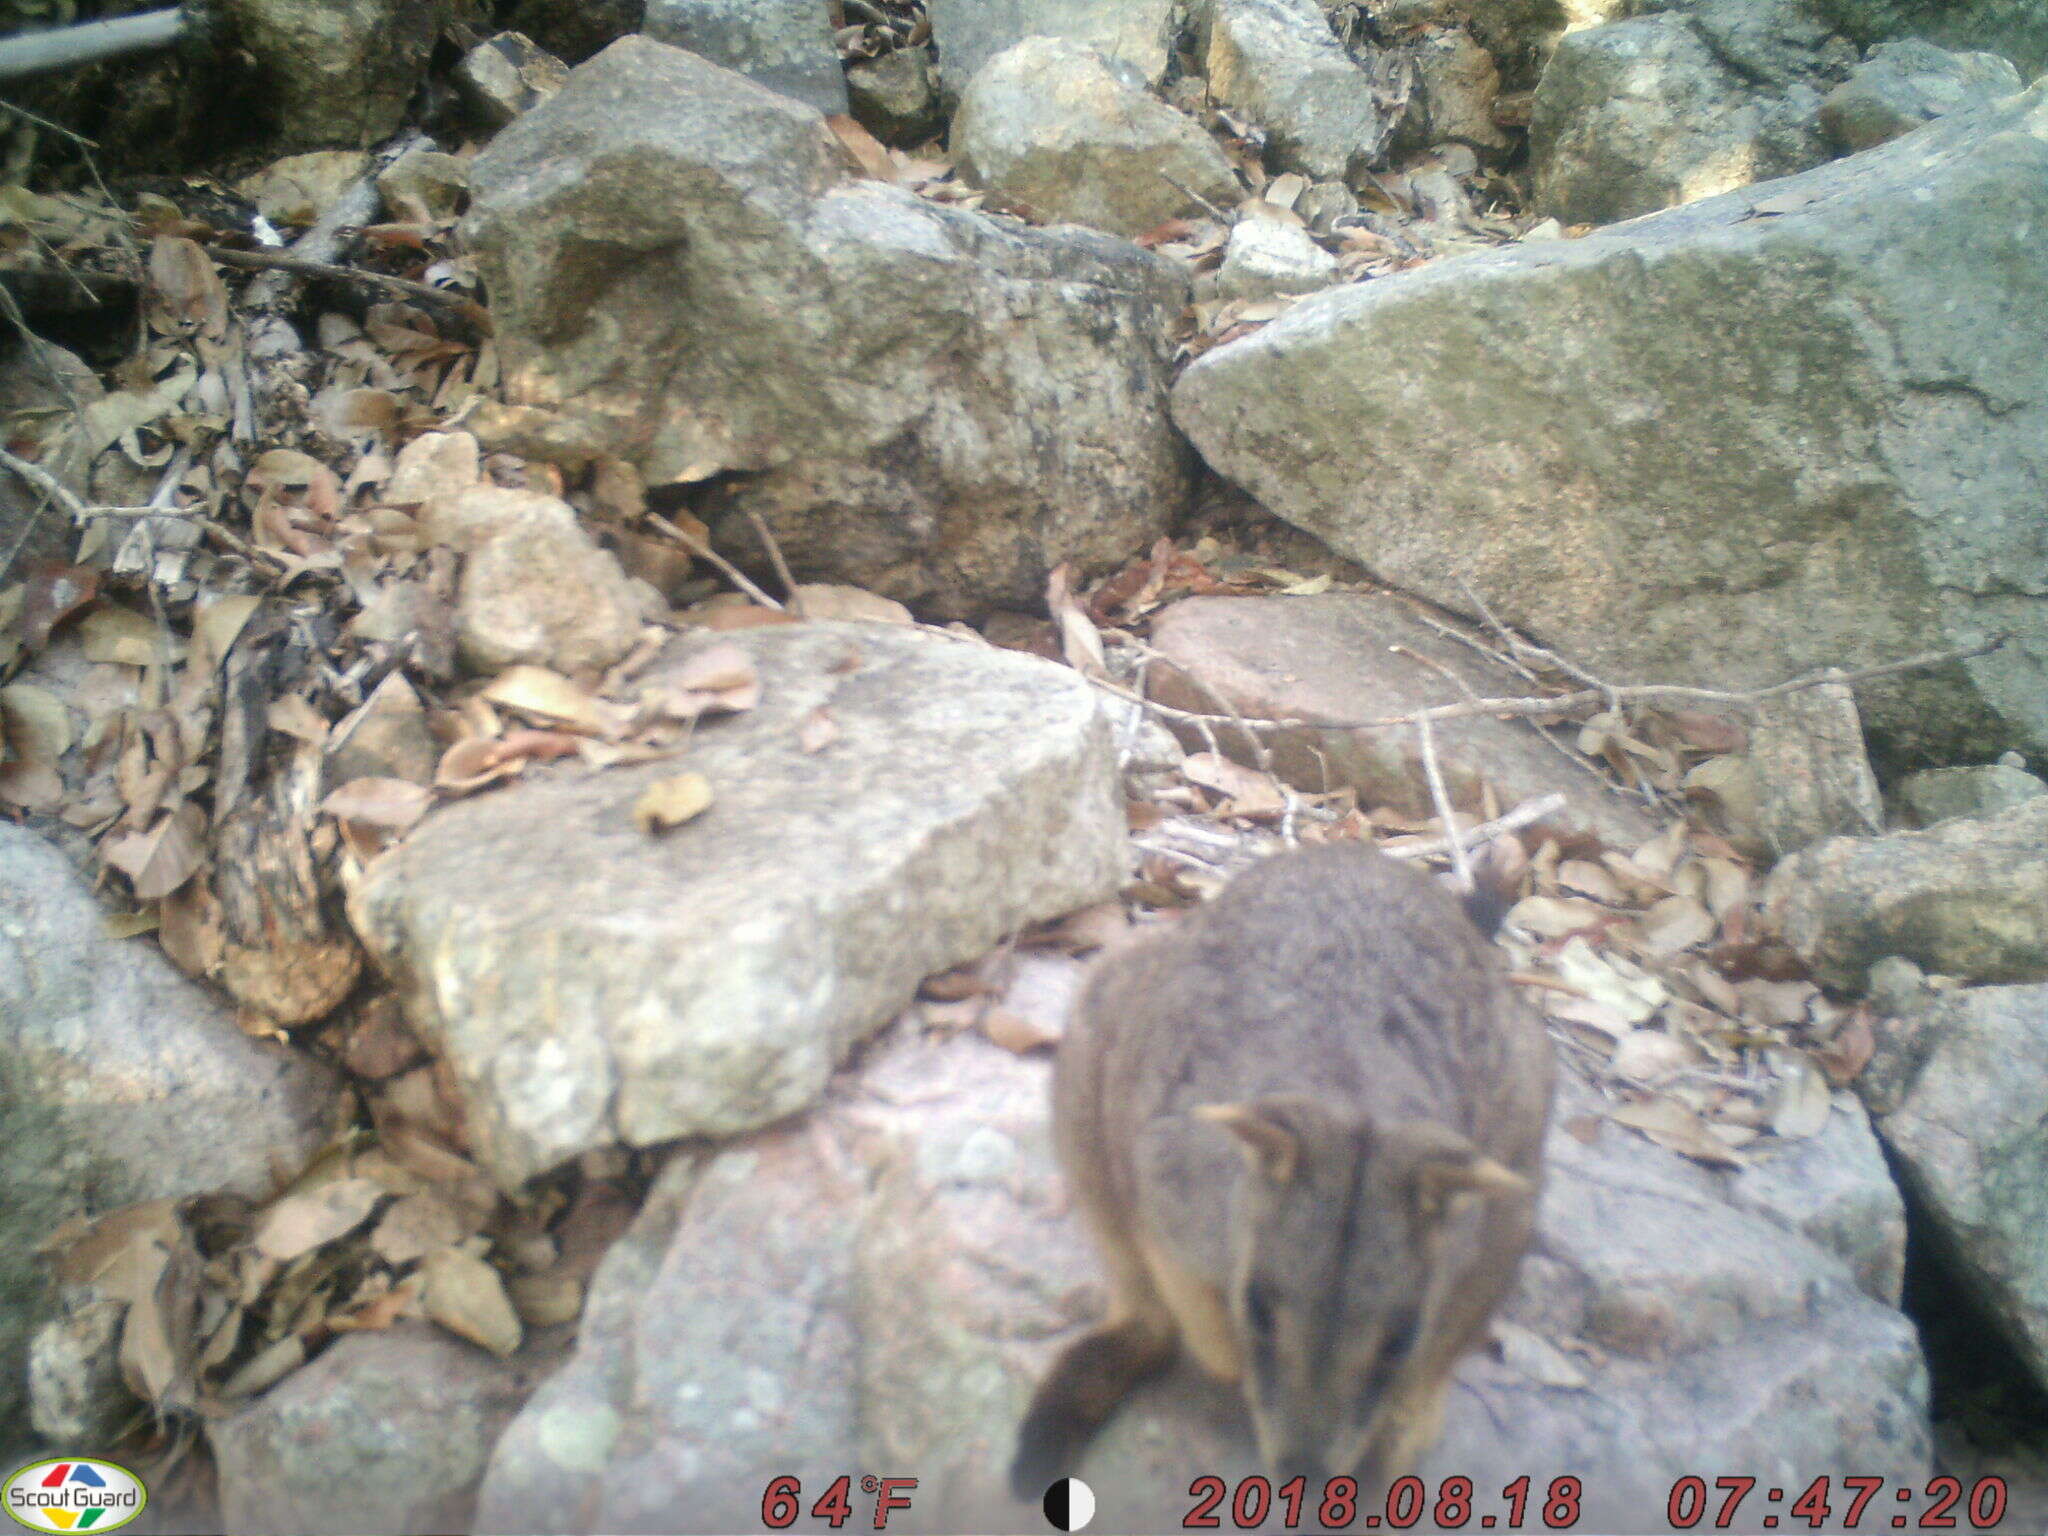 Image of Allied Rock Wallaby